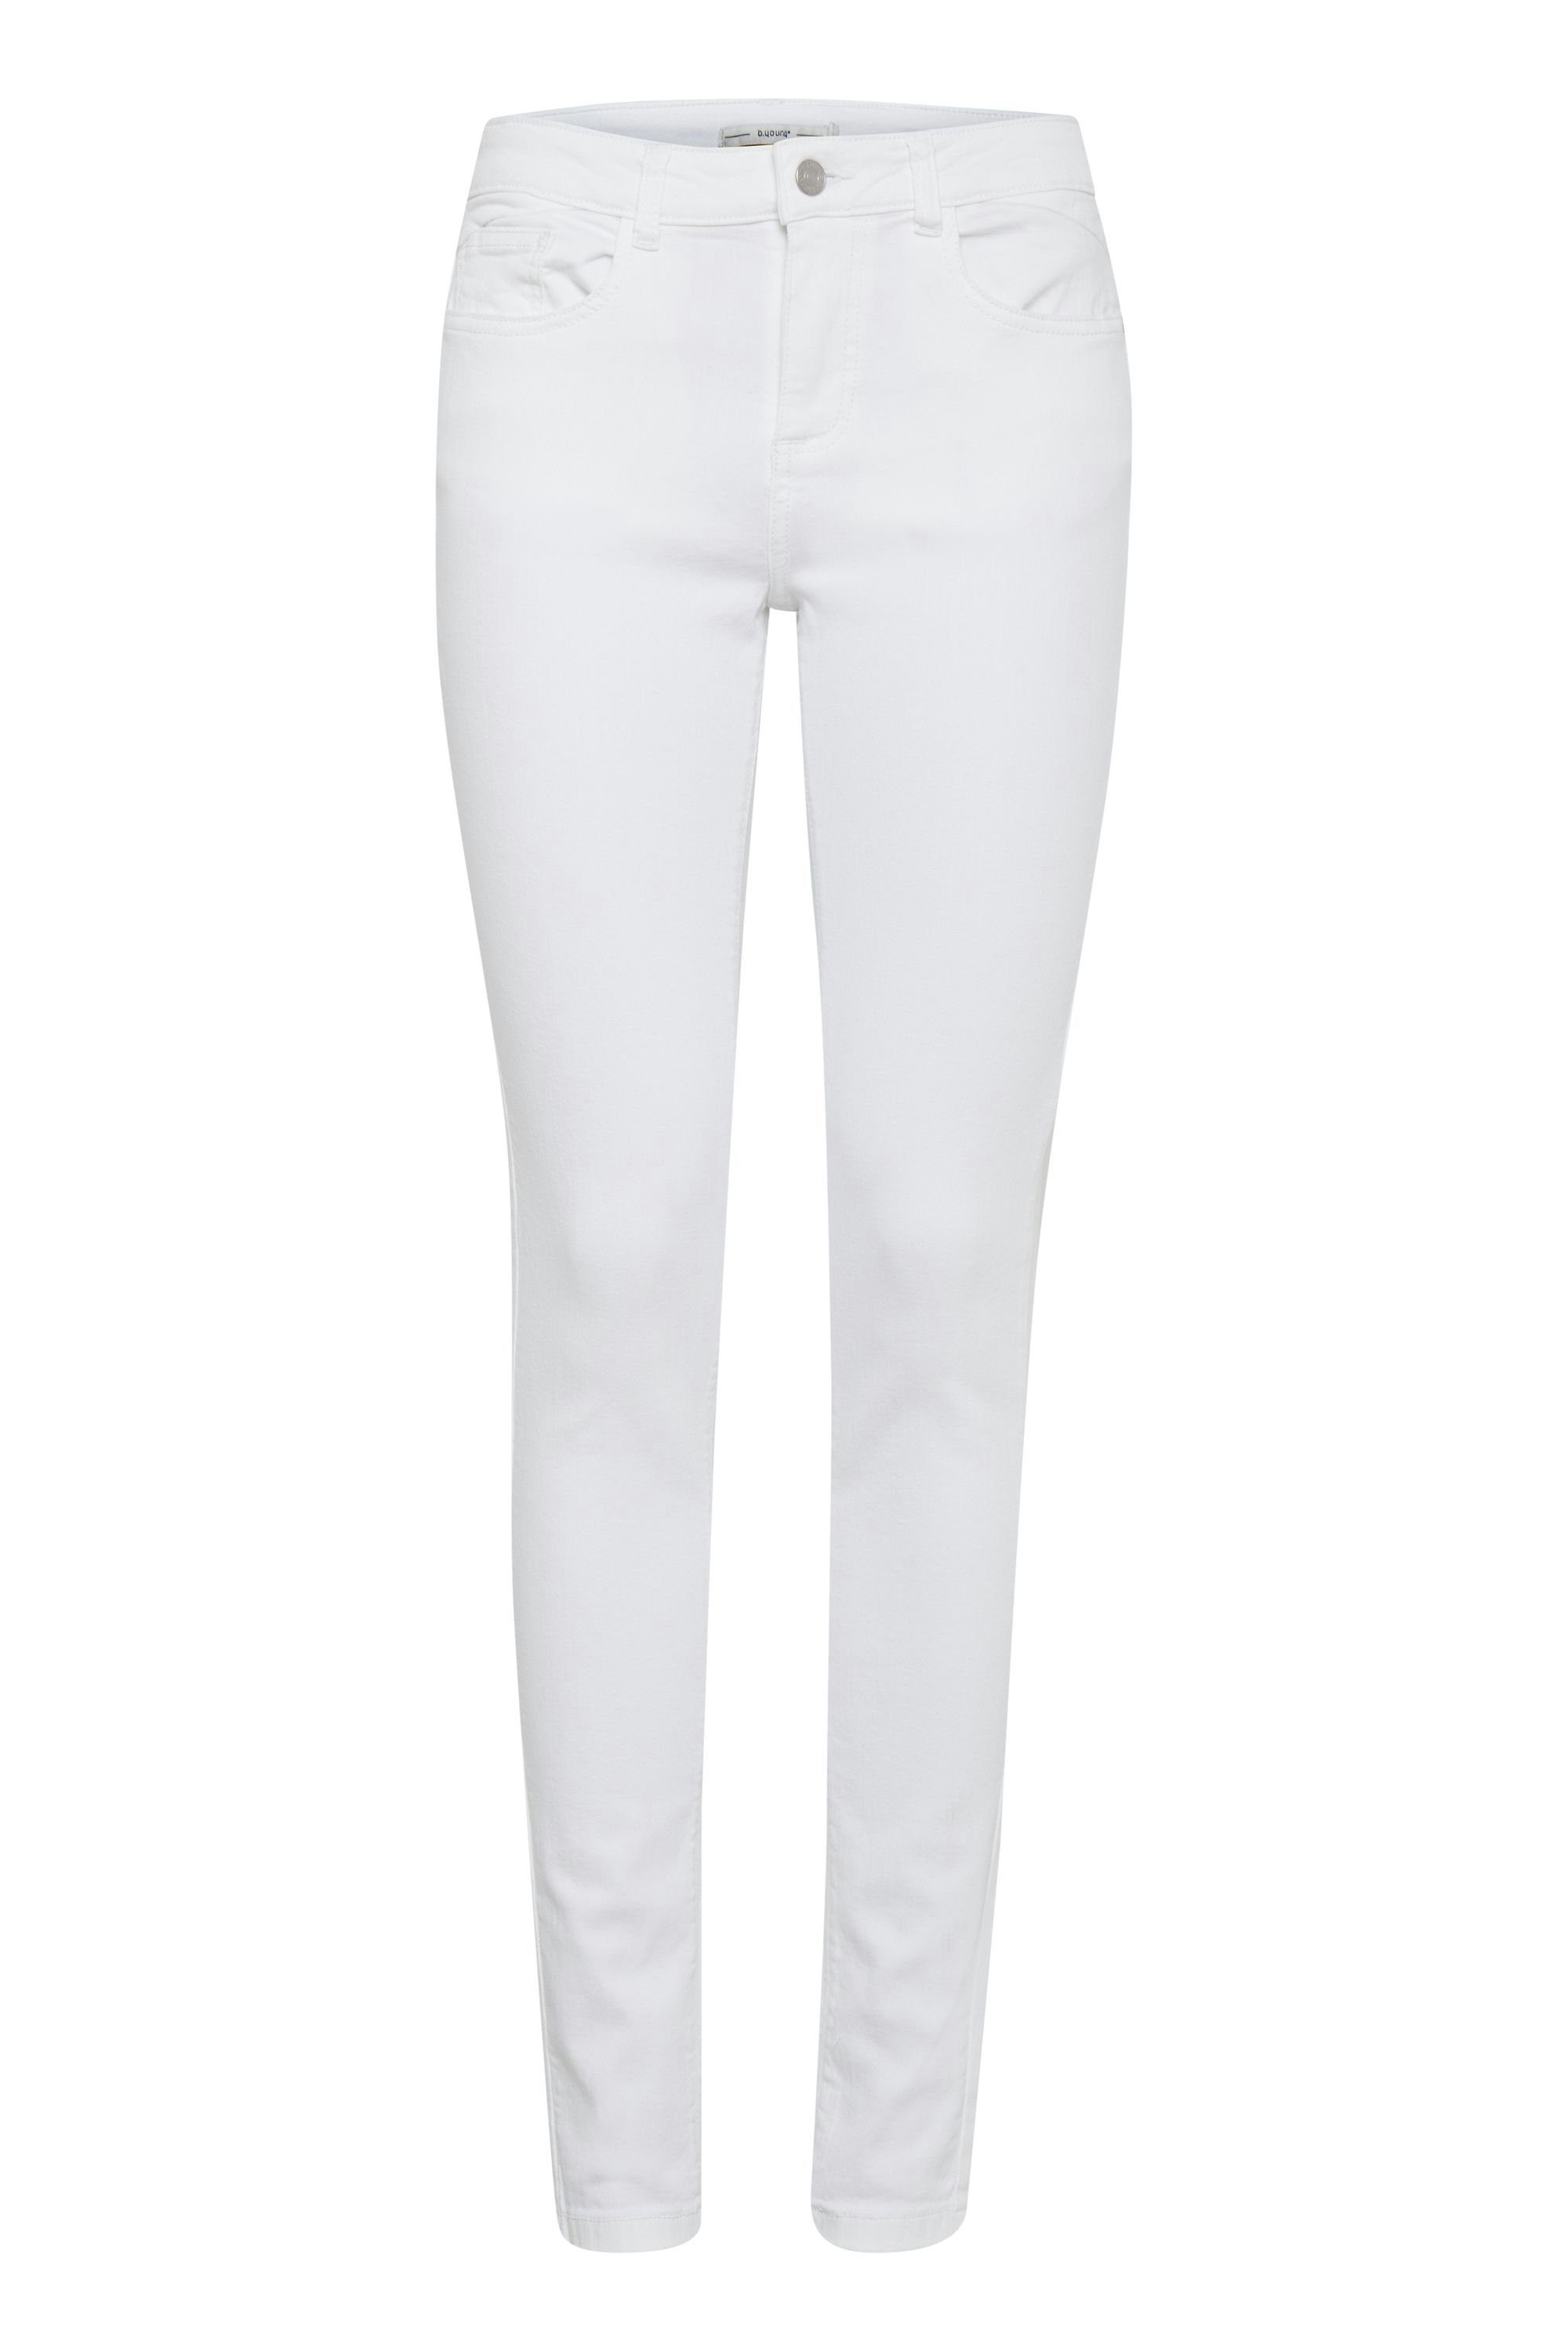 b.young Skinny-fit-Jeans Luni - 20803214 White jeans (80100) BYLola Optical